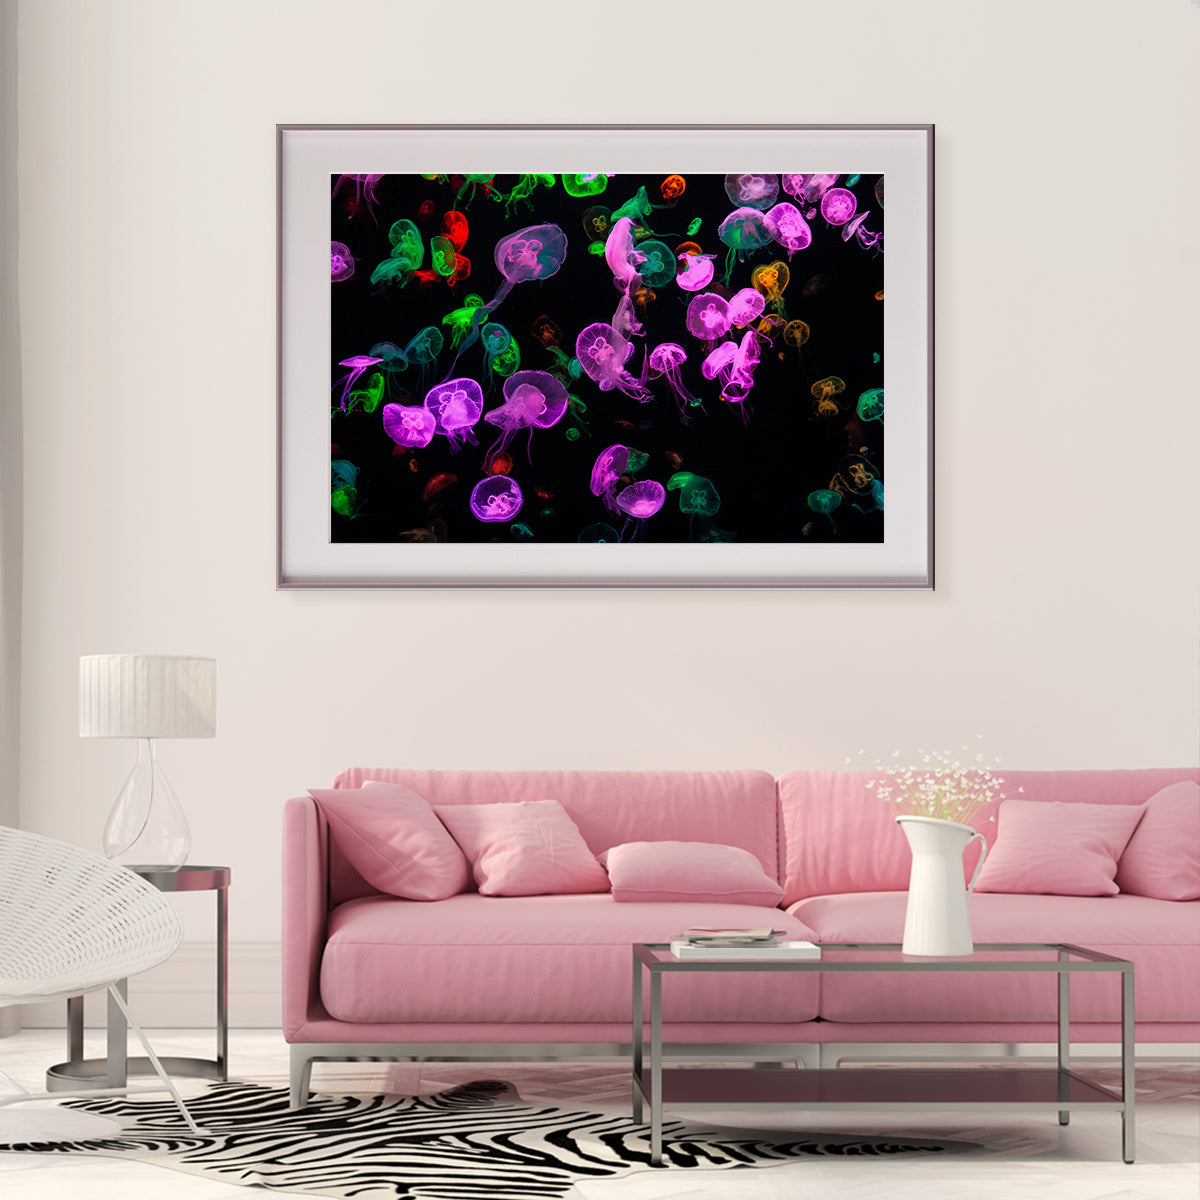 Multicolor Jellyfish Underwater Posters Decoration for Interior-Horizontal Posters NOT FRAMED-CetArt-10″x8″ inches-CetArt